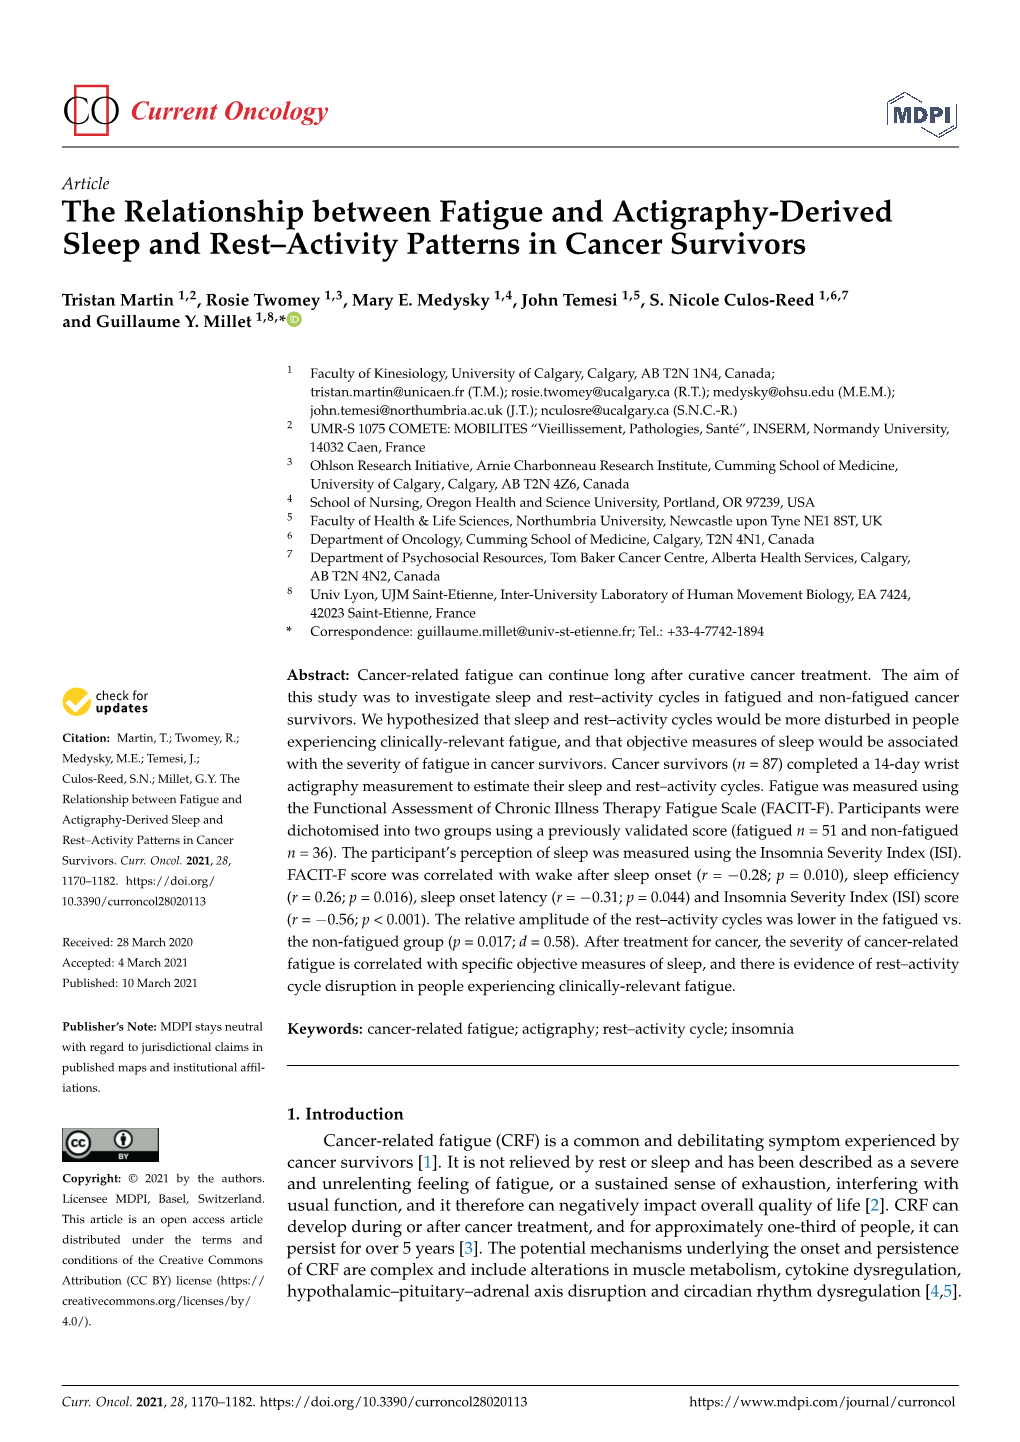 The Relationship Between Fatigue and Actigraphy-Derived Sleep and Rest–Activity Patterns in Cancer Survivors